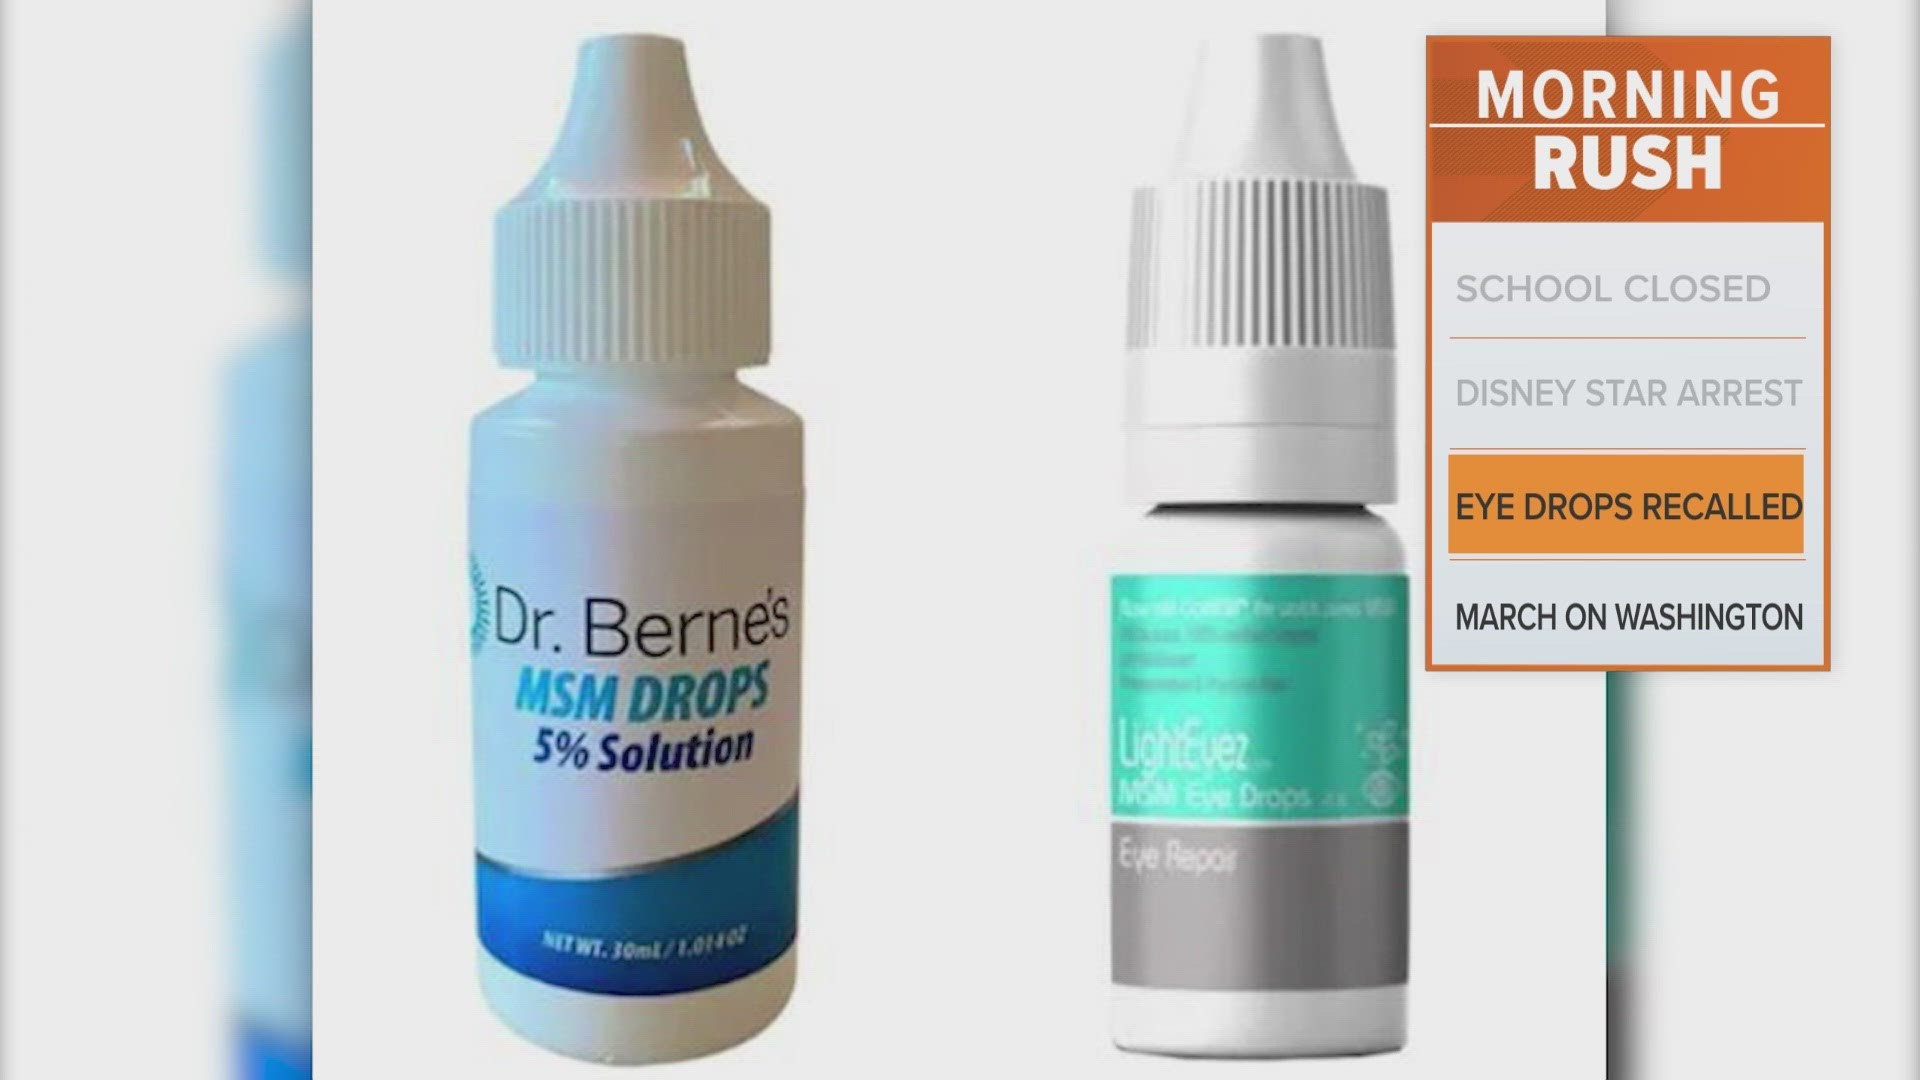 Officials say consumers should "immediately stop using" Dr. Berne’s MSM Drops 5% Solution and LightEyez MSM Eye Drops – Eye Repair.